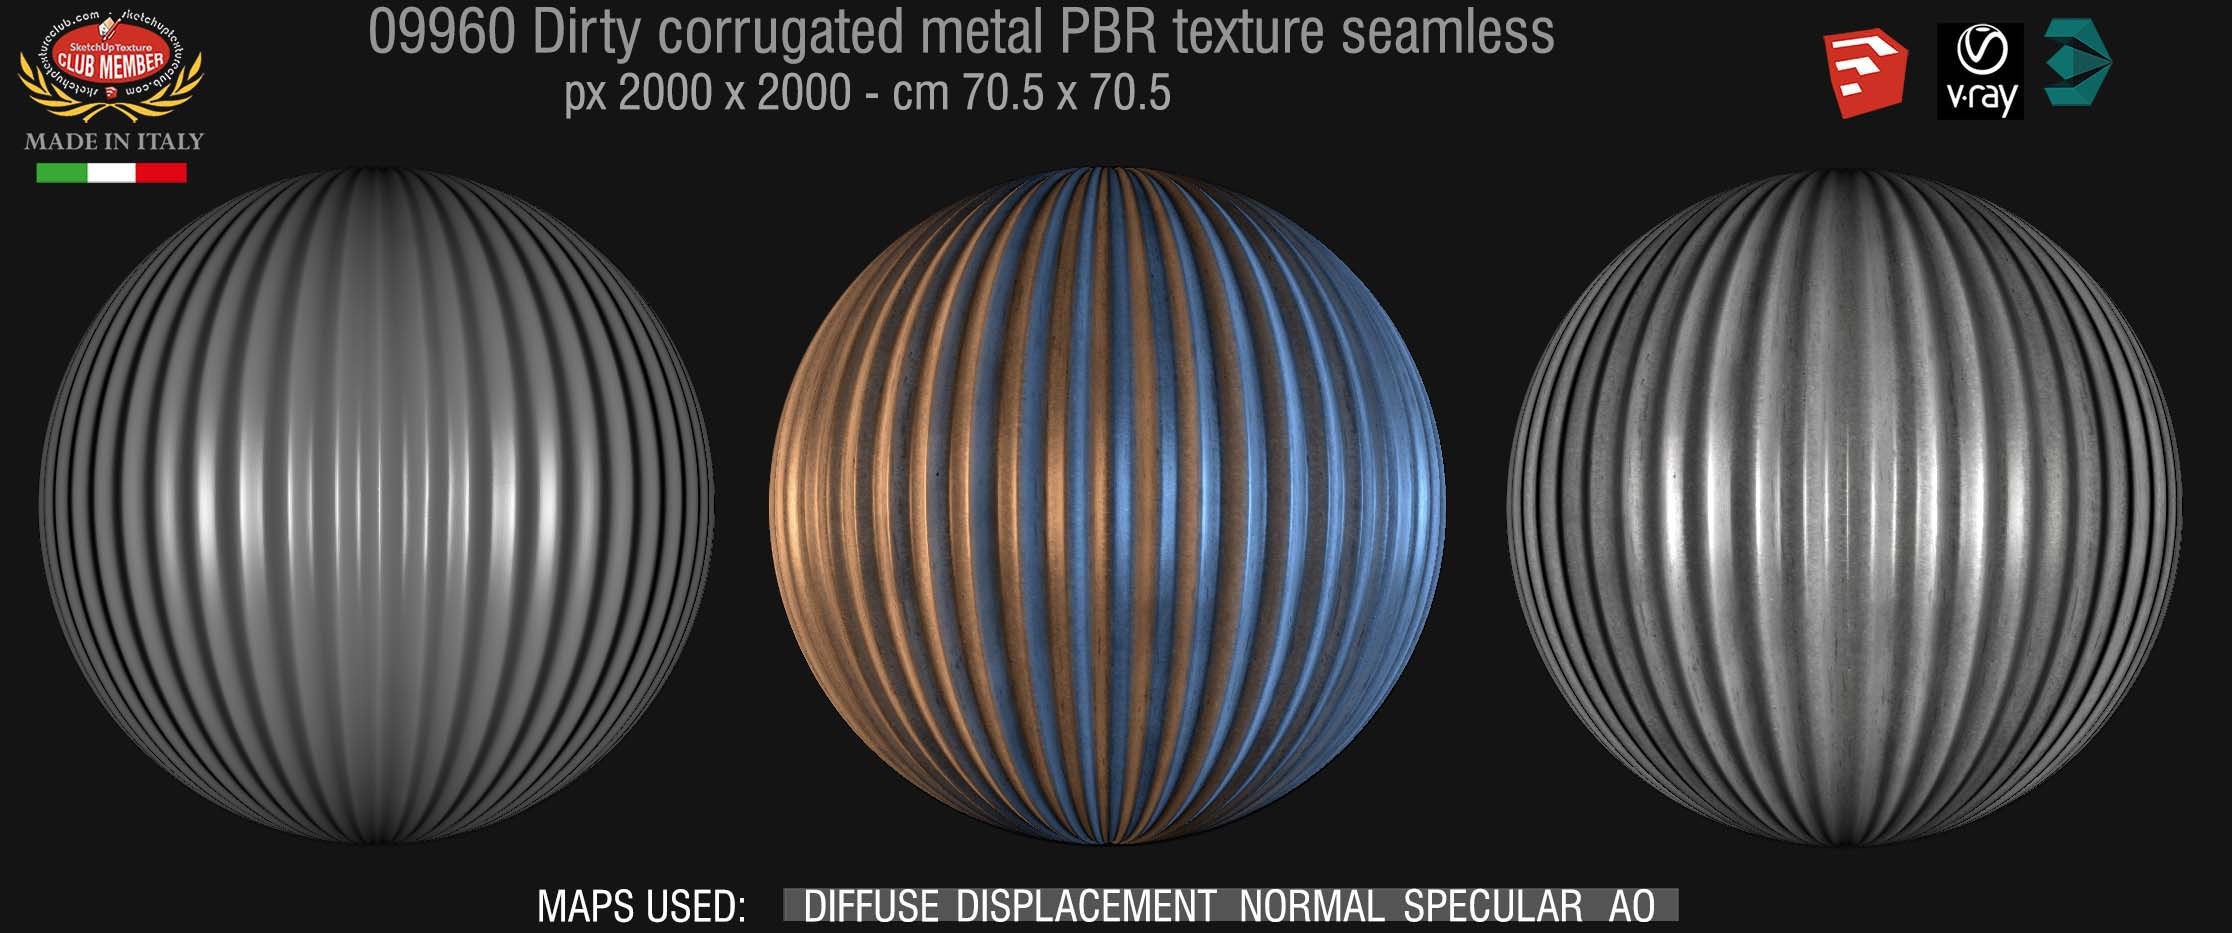 09960 Dirty corrugated metal PBR texture seamless DEMO